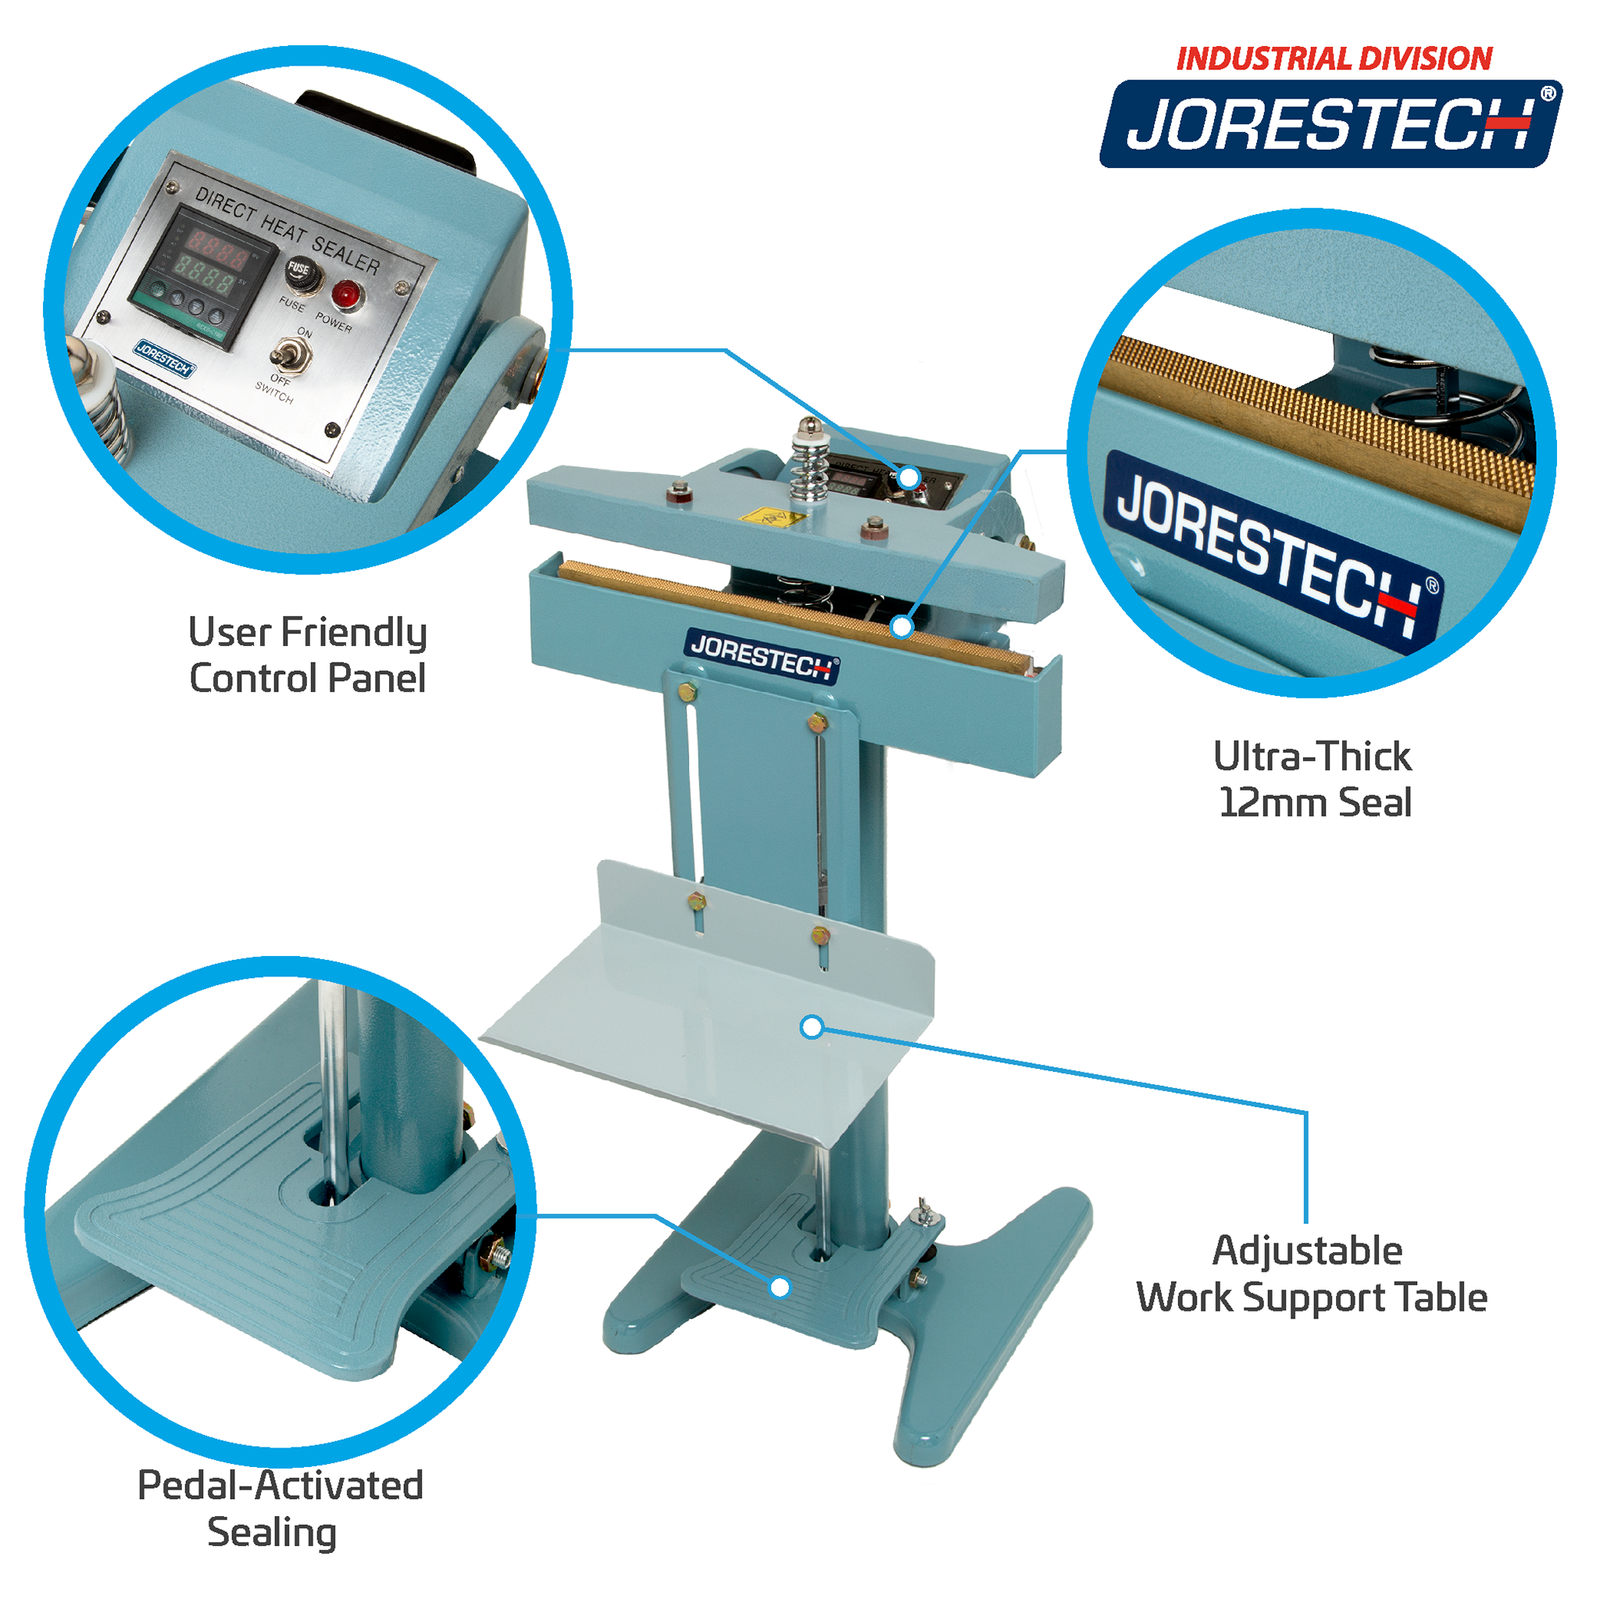 Constant foot impulse bag sealer with highlighted features:  User Friendly Control Panel, Adjustable Work Support Table, and Pedal-Activated Sealing. 